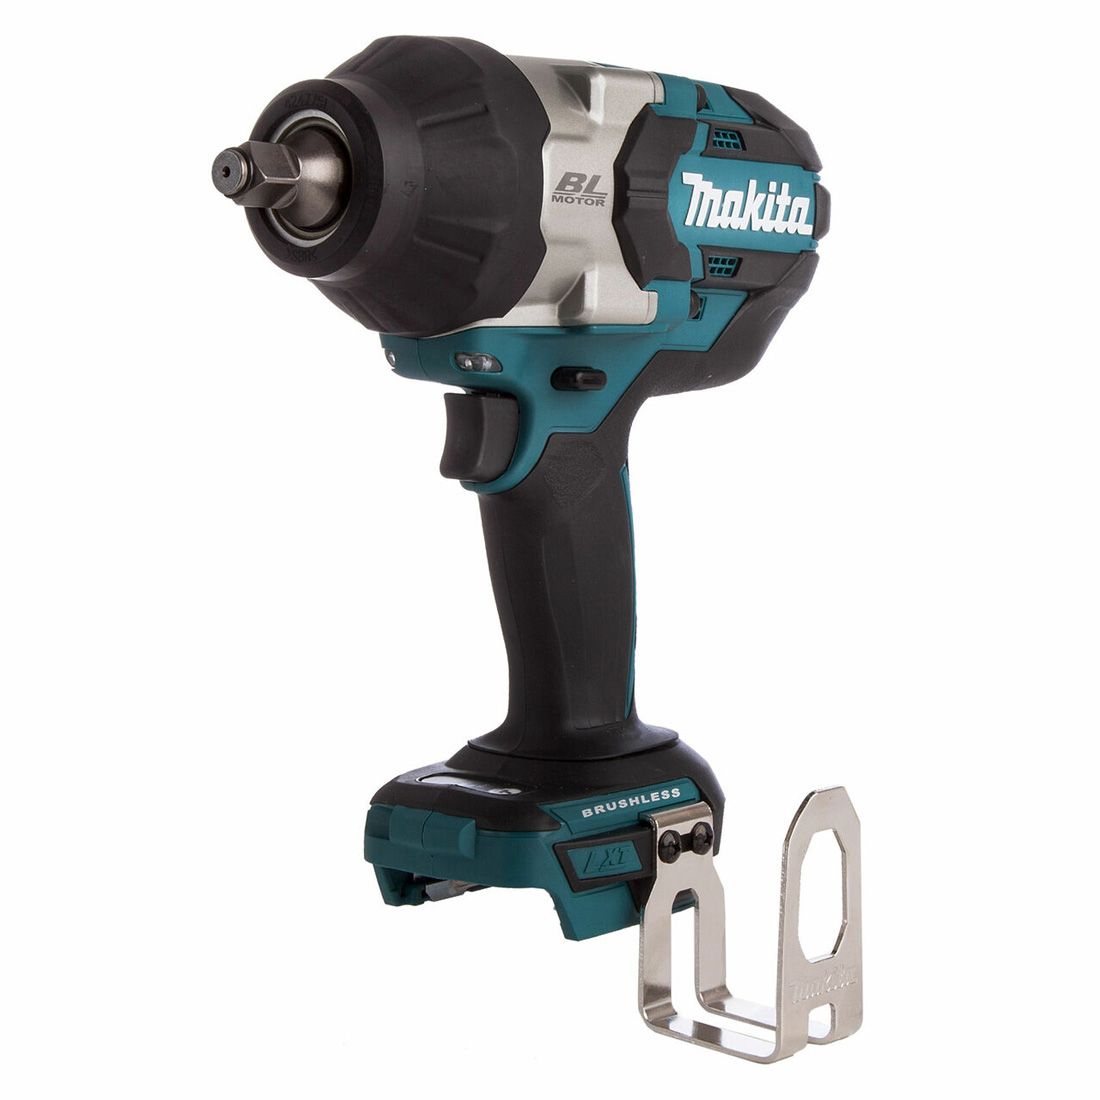 MAKITA DTW1002Z 18V LXT Brushless 1/2 inch Impact Wrench - Body Only